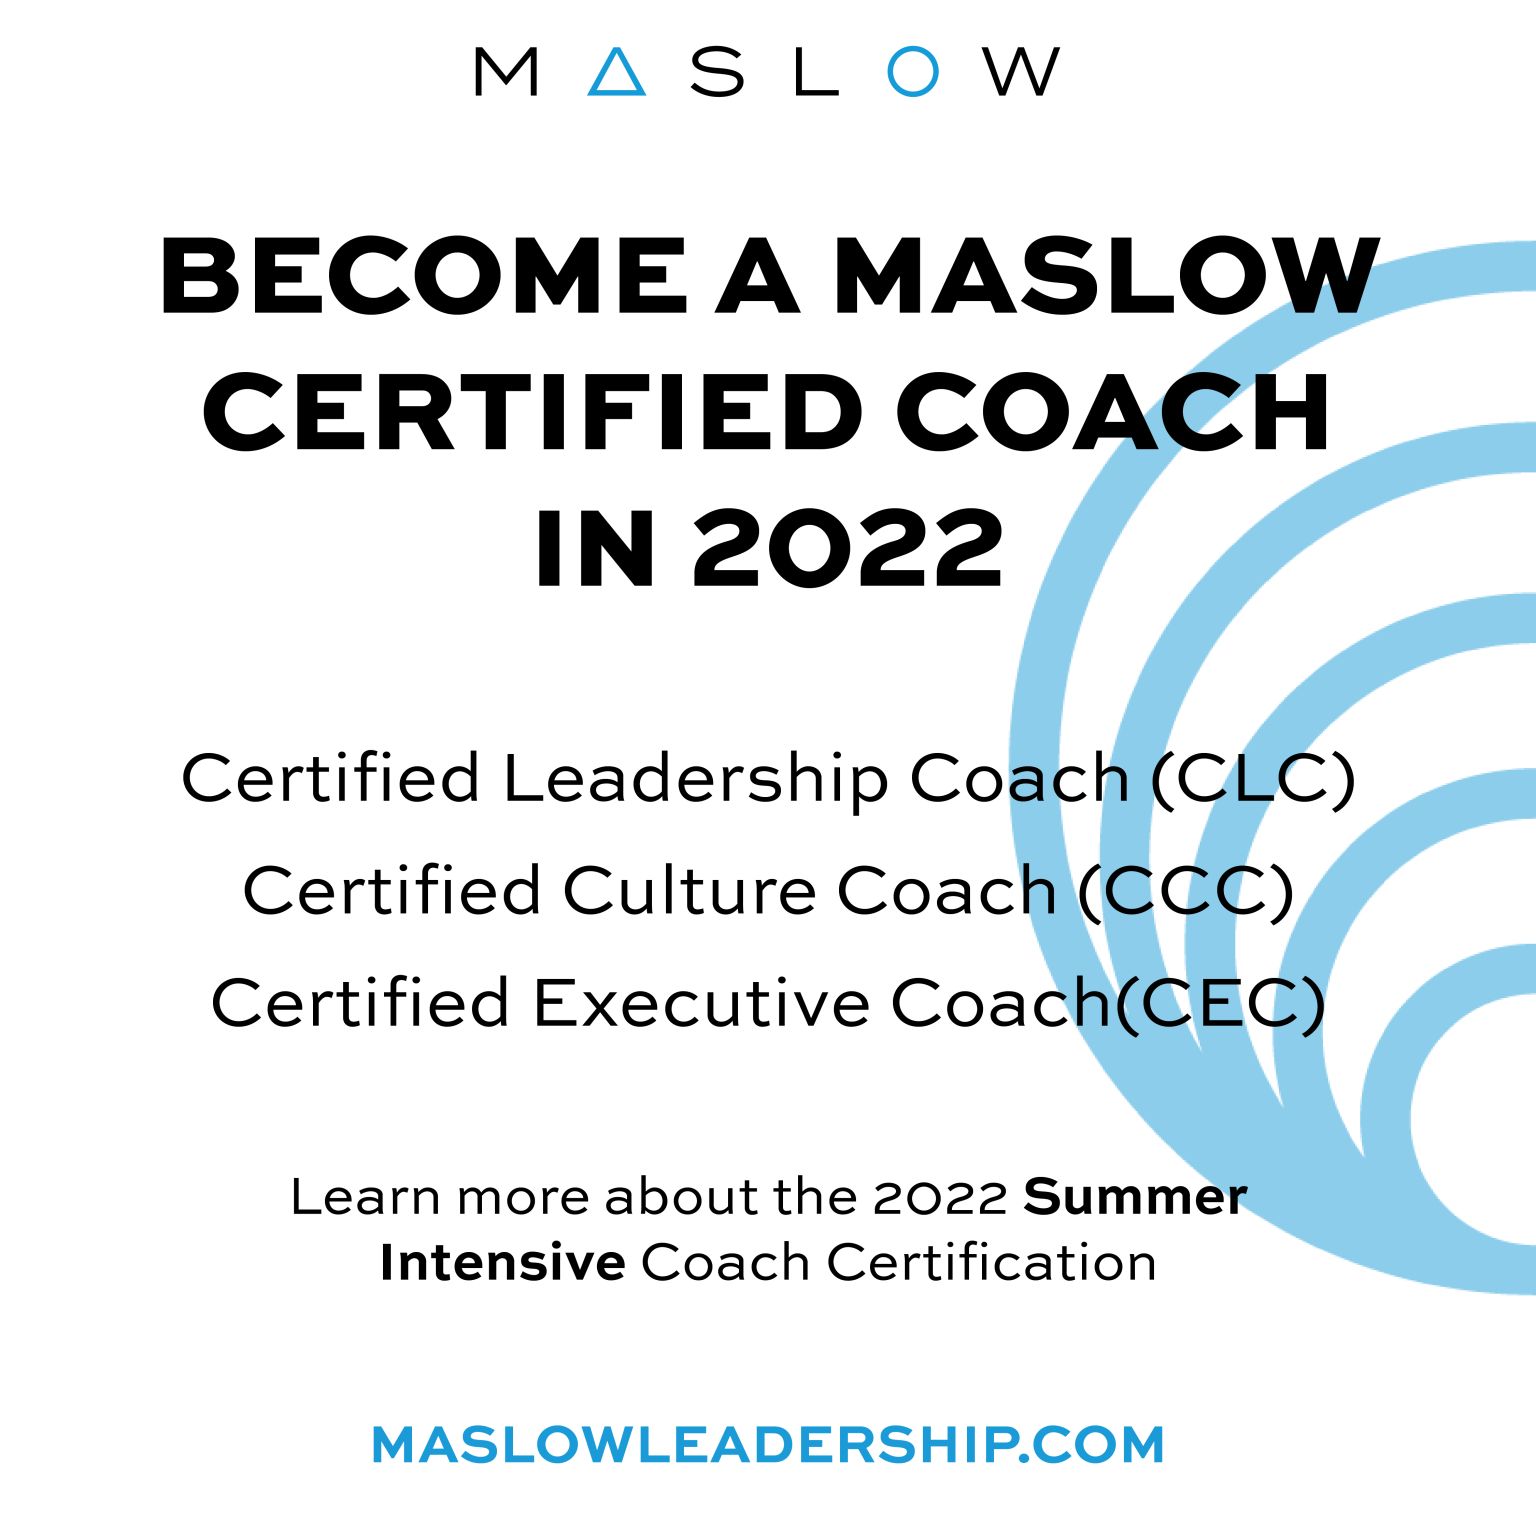 BEcome a Maslow Coach in 2022